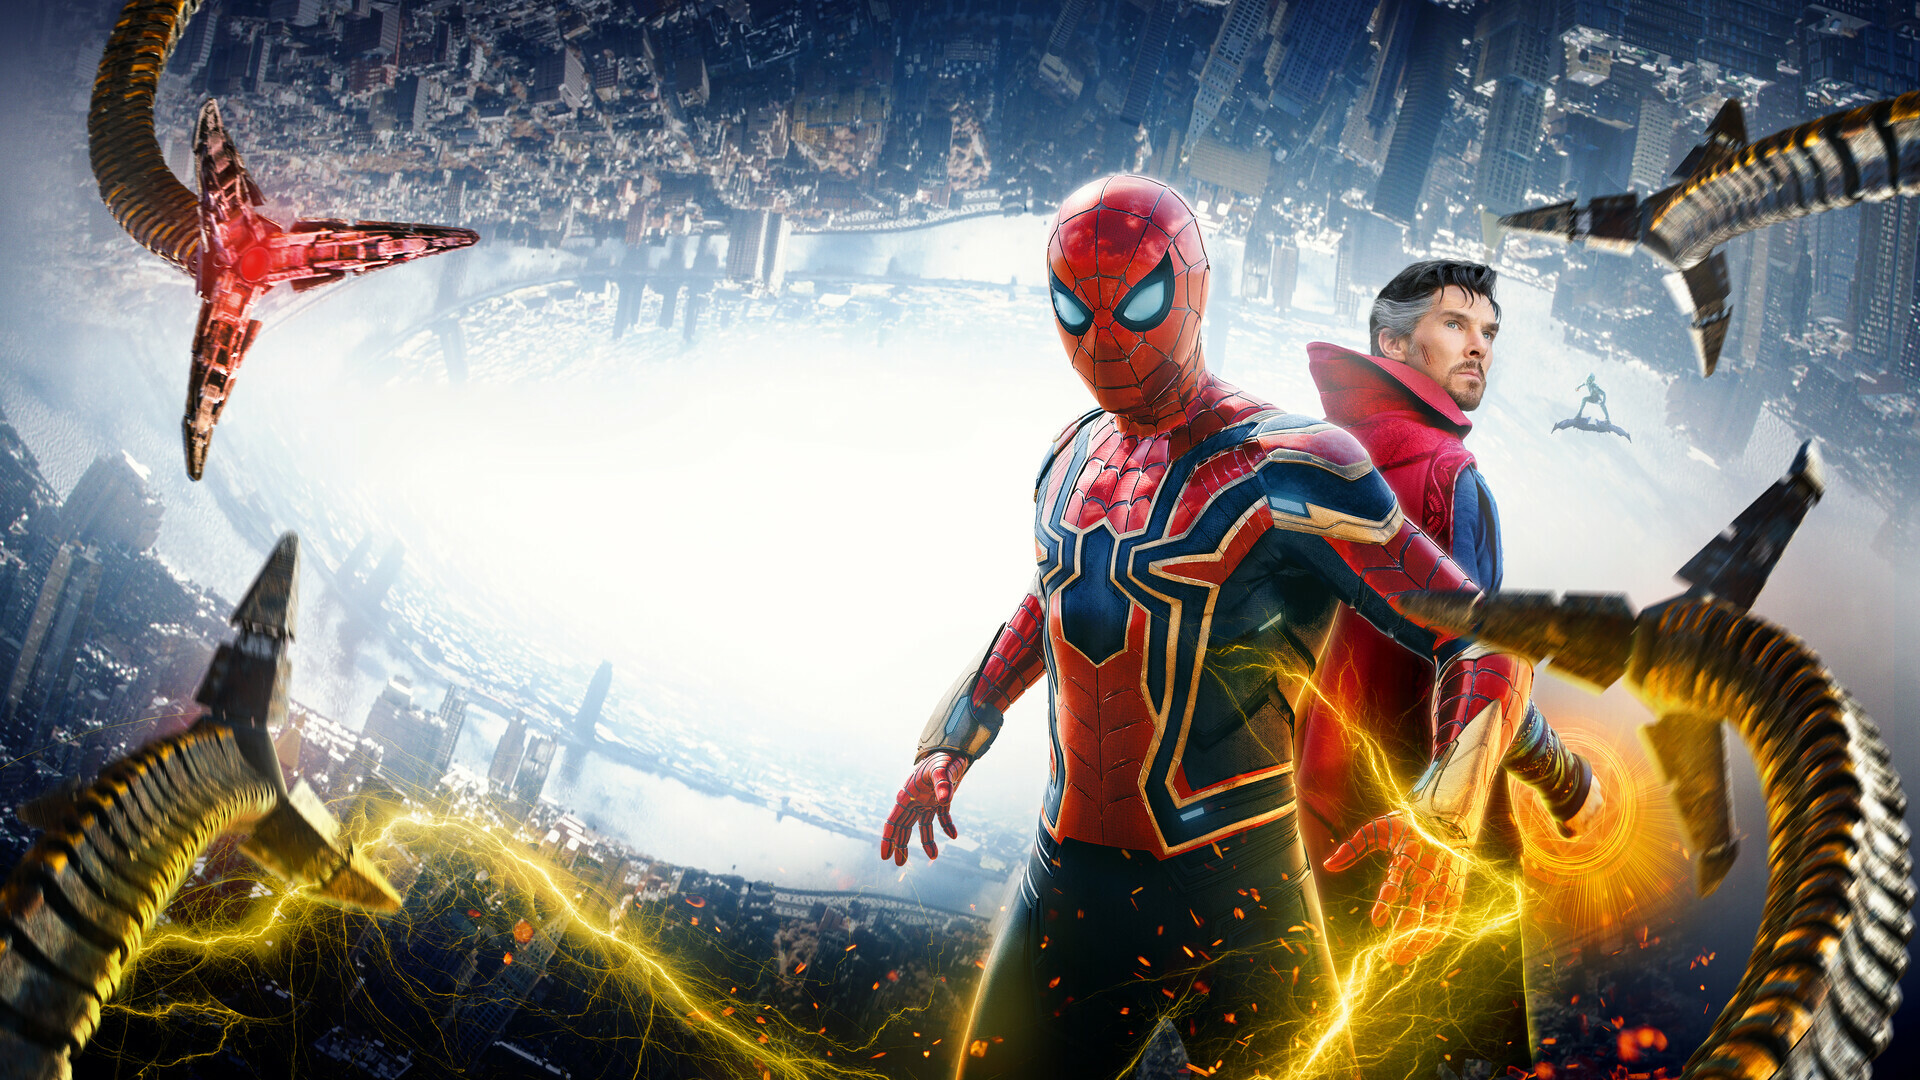 Spider-Man: No Way Home: The film became Sony's highest-grossing film in history. 1920x1080 Full HD Background.